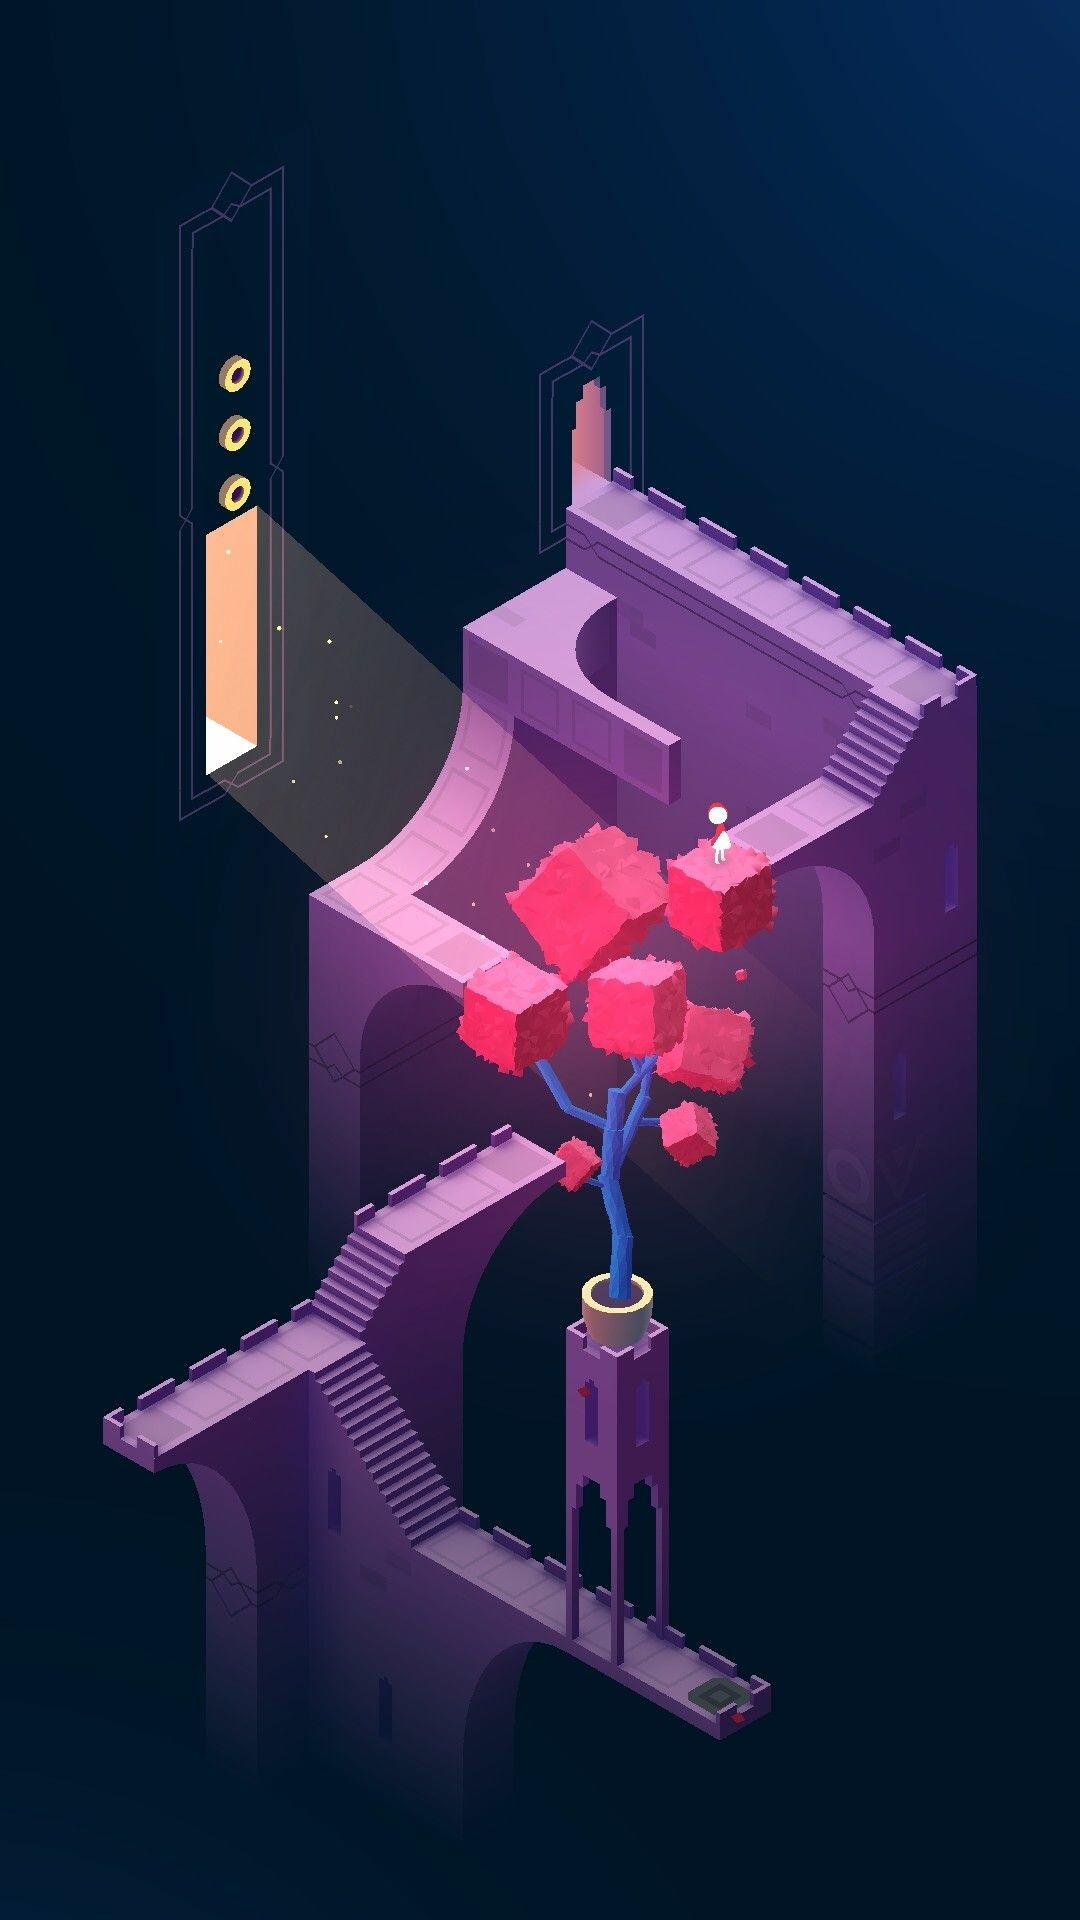 Monument Valley: A surreal exploration through fantastical architecture and impossible geometry, Ustwo Games. 1080x1920 Full HD Background.